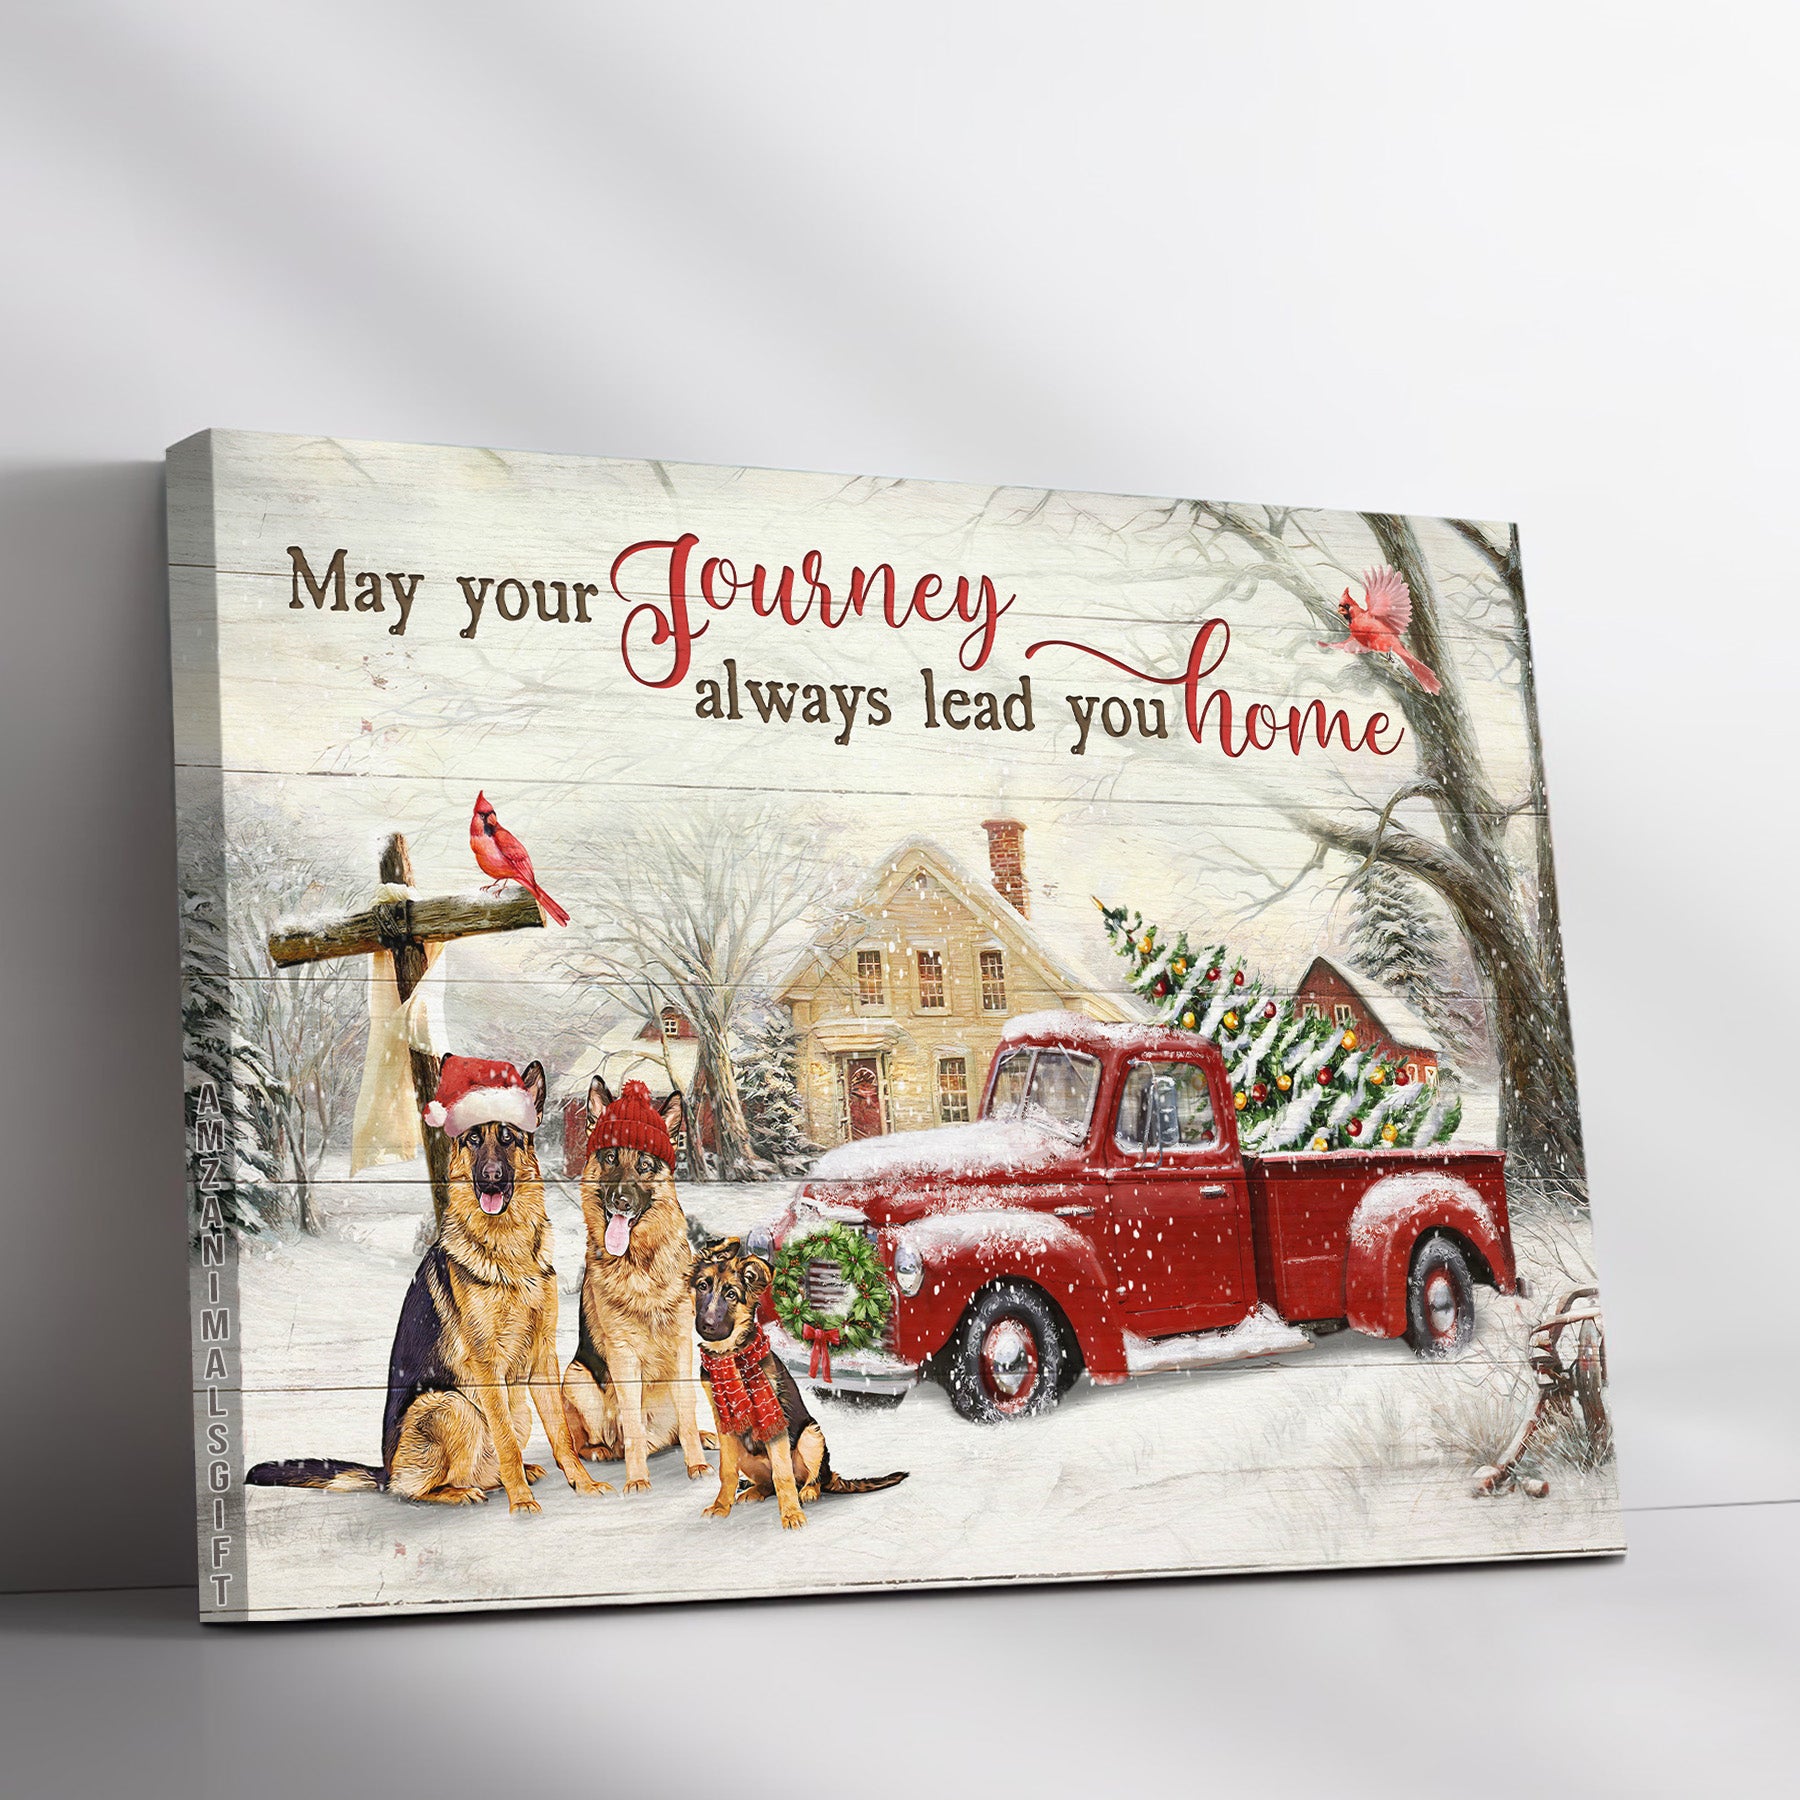 German Shepherd & Jesus Premium Wrapped Landscape Canvas - Christmas, German Shepherd, May Your Journey Always Lead You Home - Gift For Christian